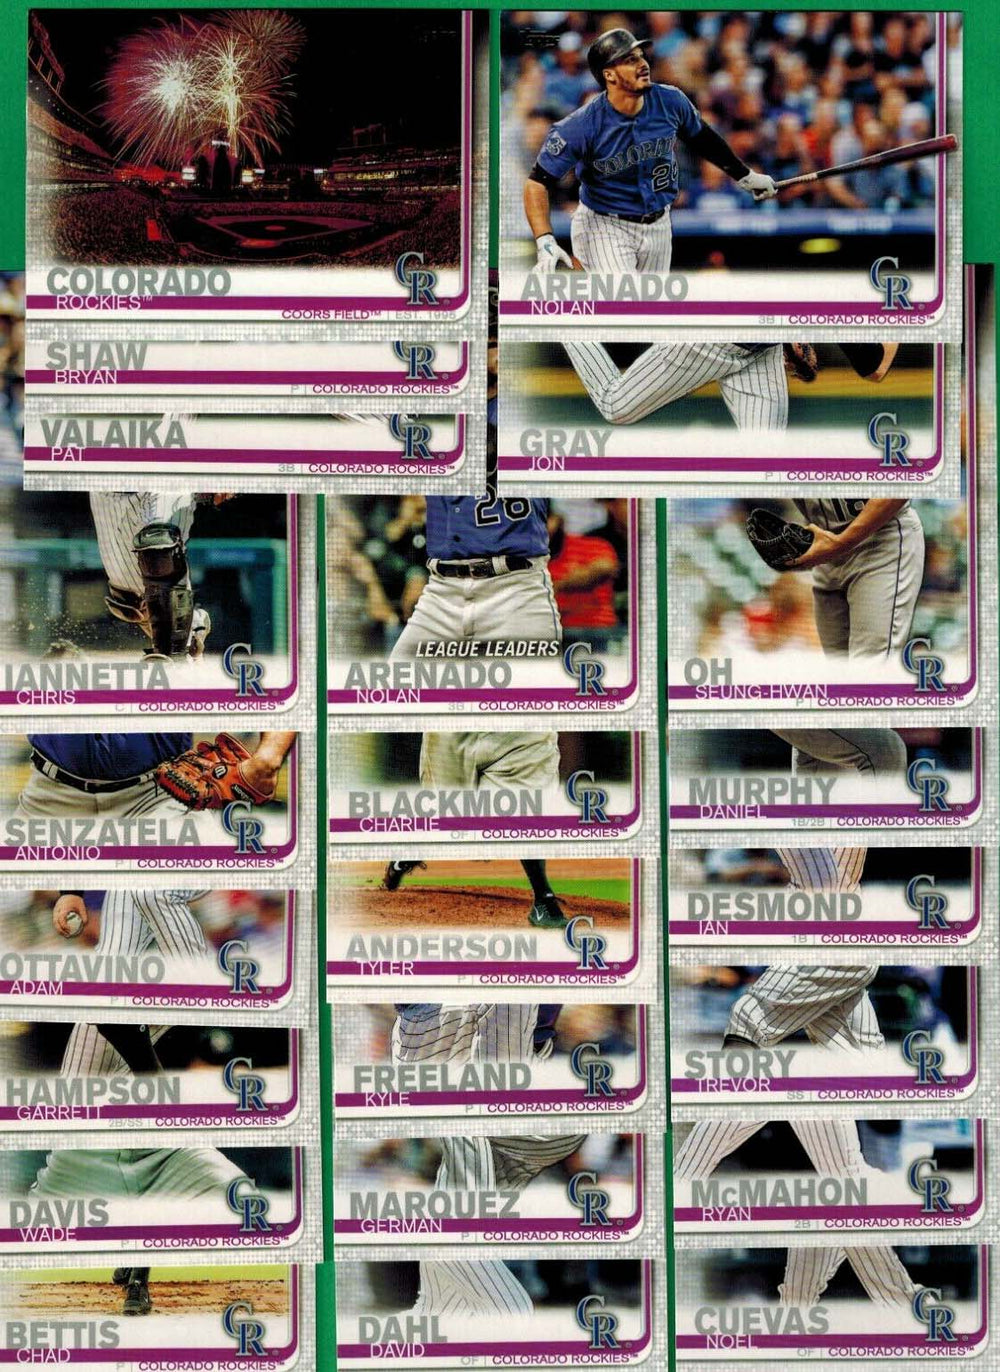 Colorado Rockies 2019 Topps Complete Series One and Two Regular Issue 23 card Team Set